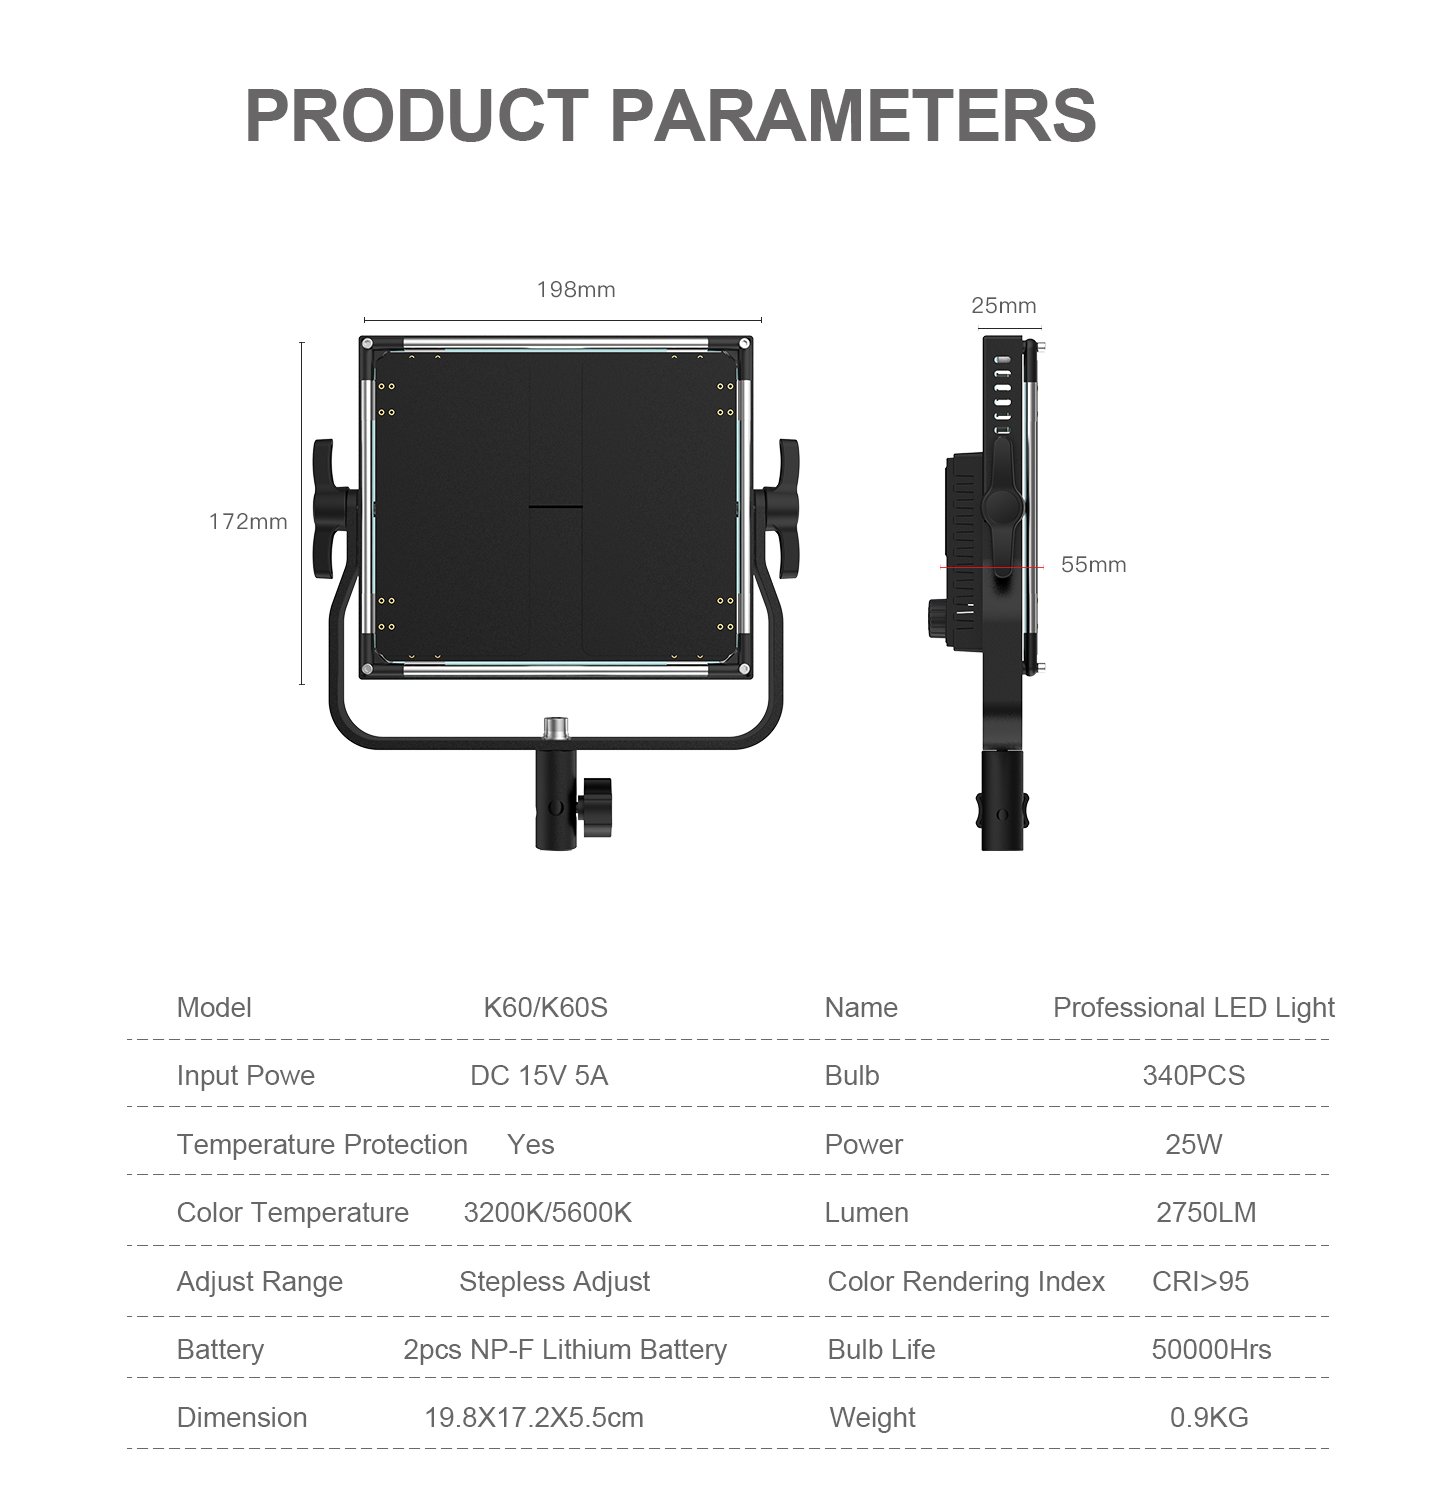 PRODUCT PARAMETERS